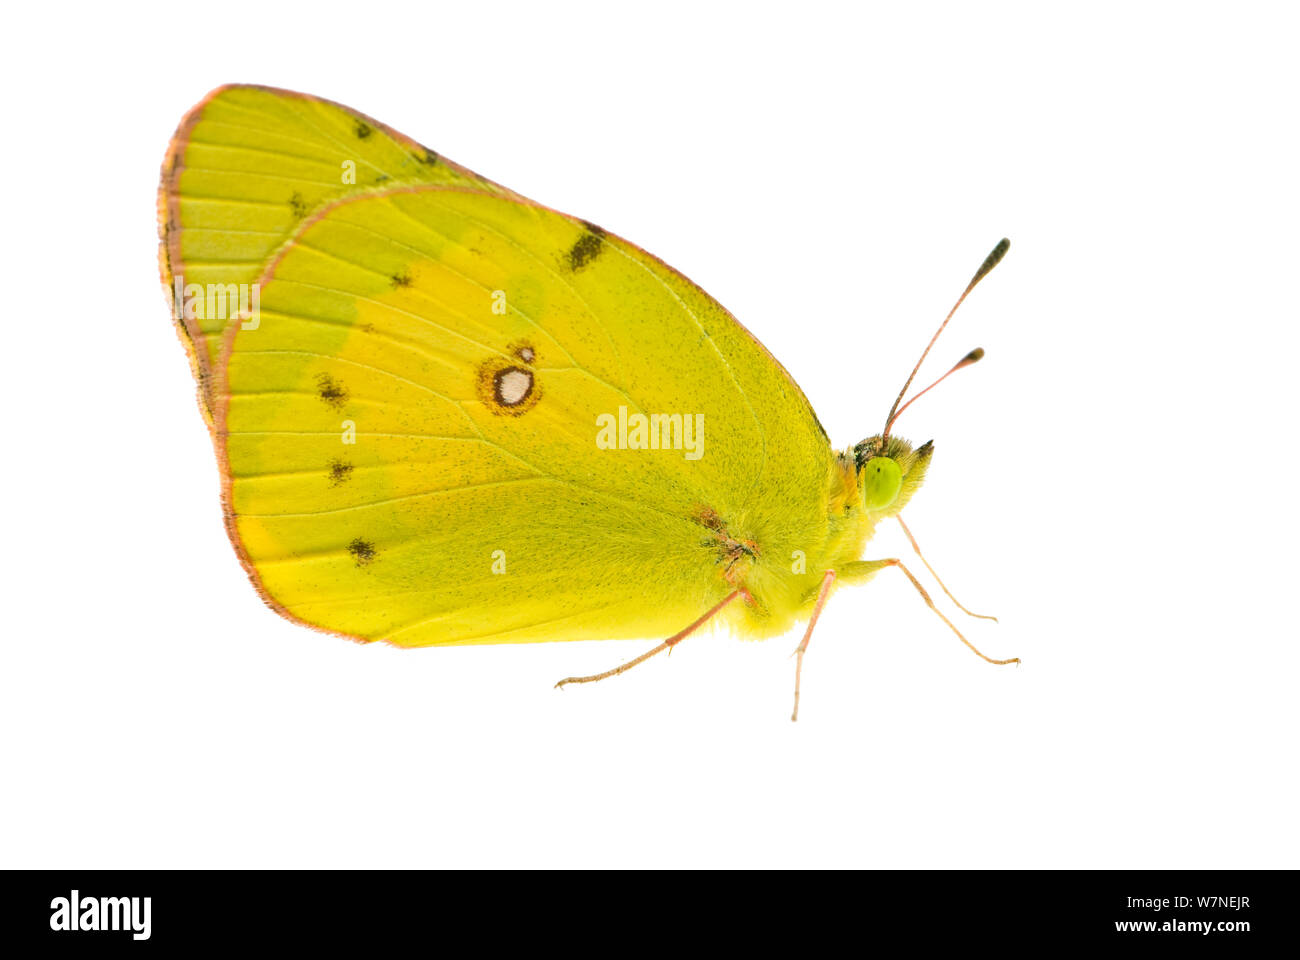 Orange Sulphur Butterfly (Colias eurytheme) San Joaquin River Gorge, Auberry California, May. meetyourneighbours.net project Stock Photo